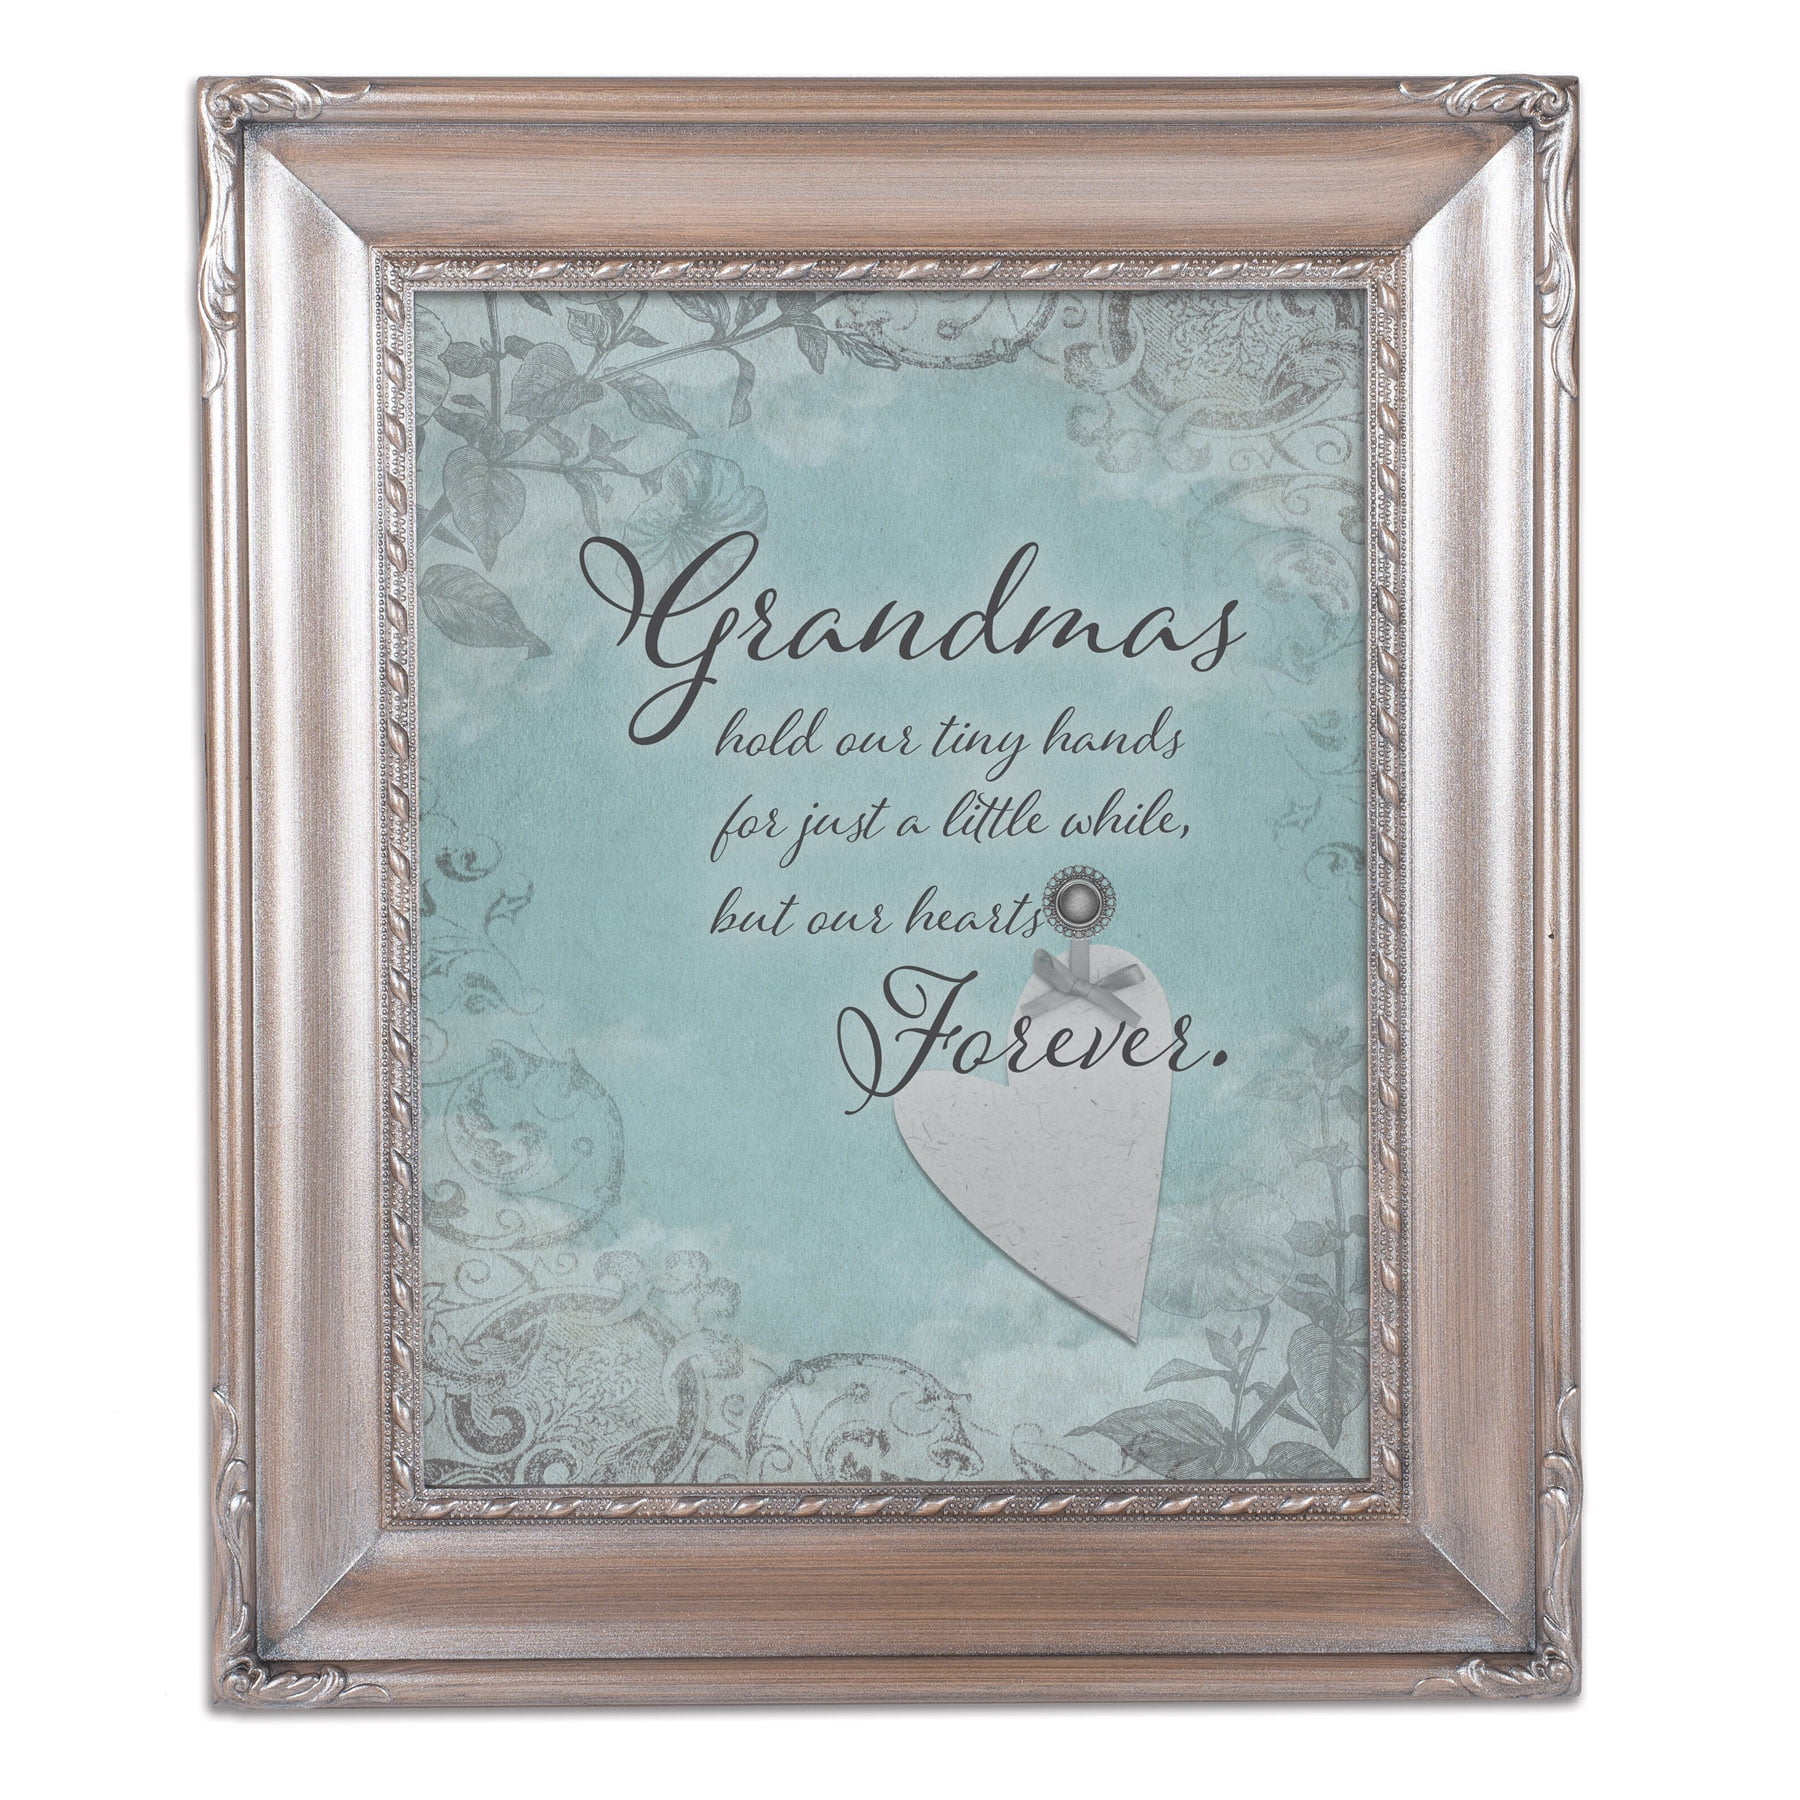 Afuly Vintage Picture Frame 4x6 Gold and Off White for Tabletop Display Wall Hanging Antique Distressed Unique Gifts for Grandma 